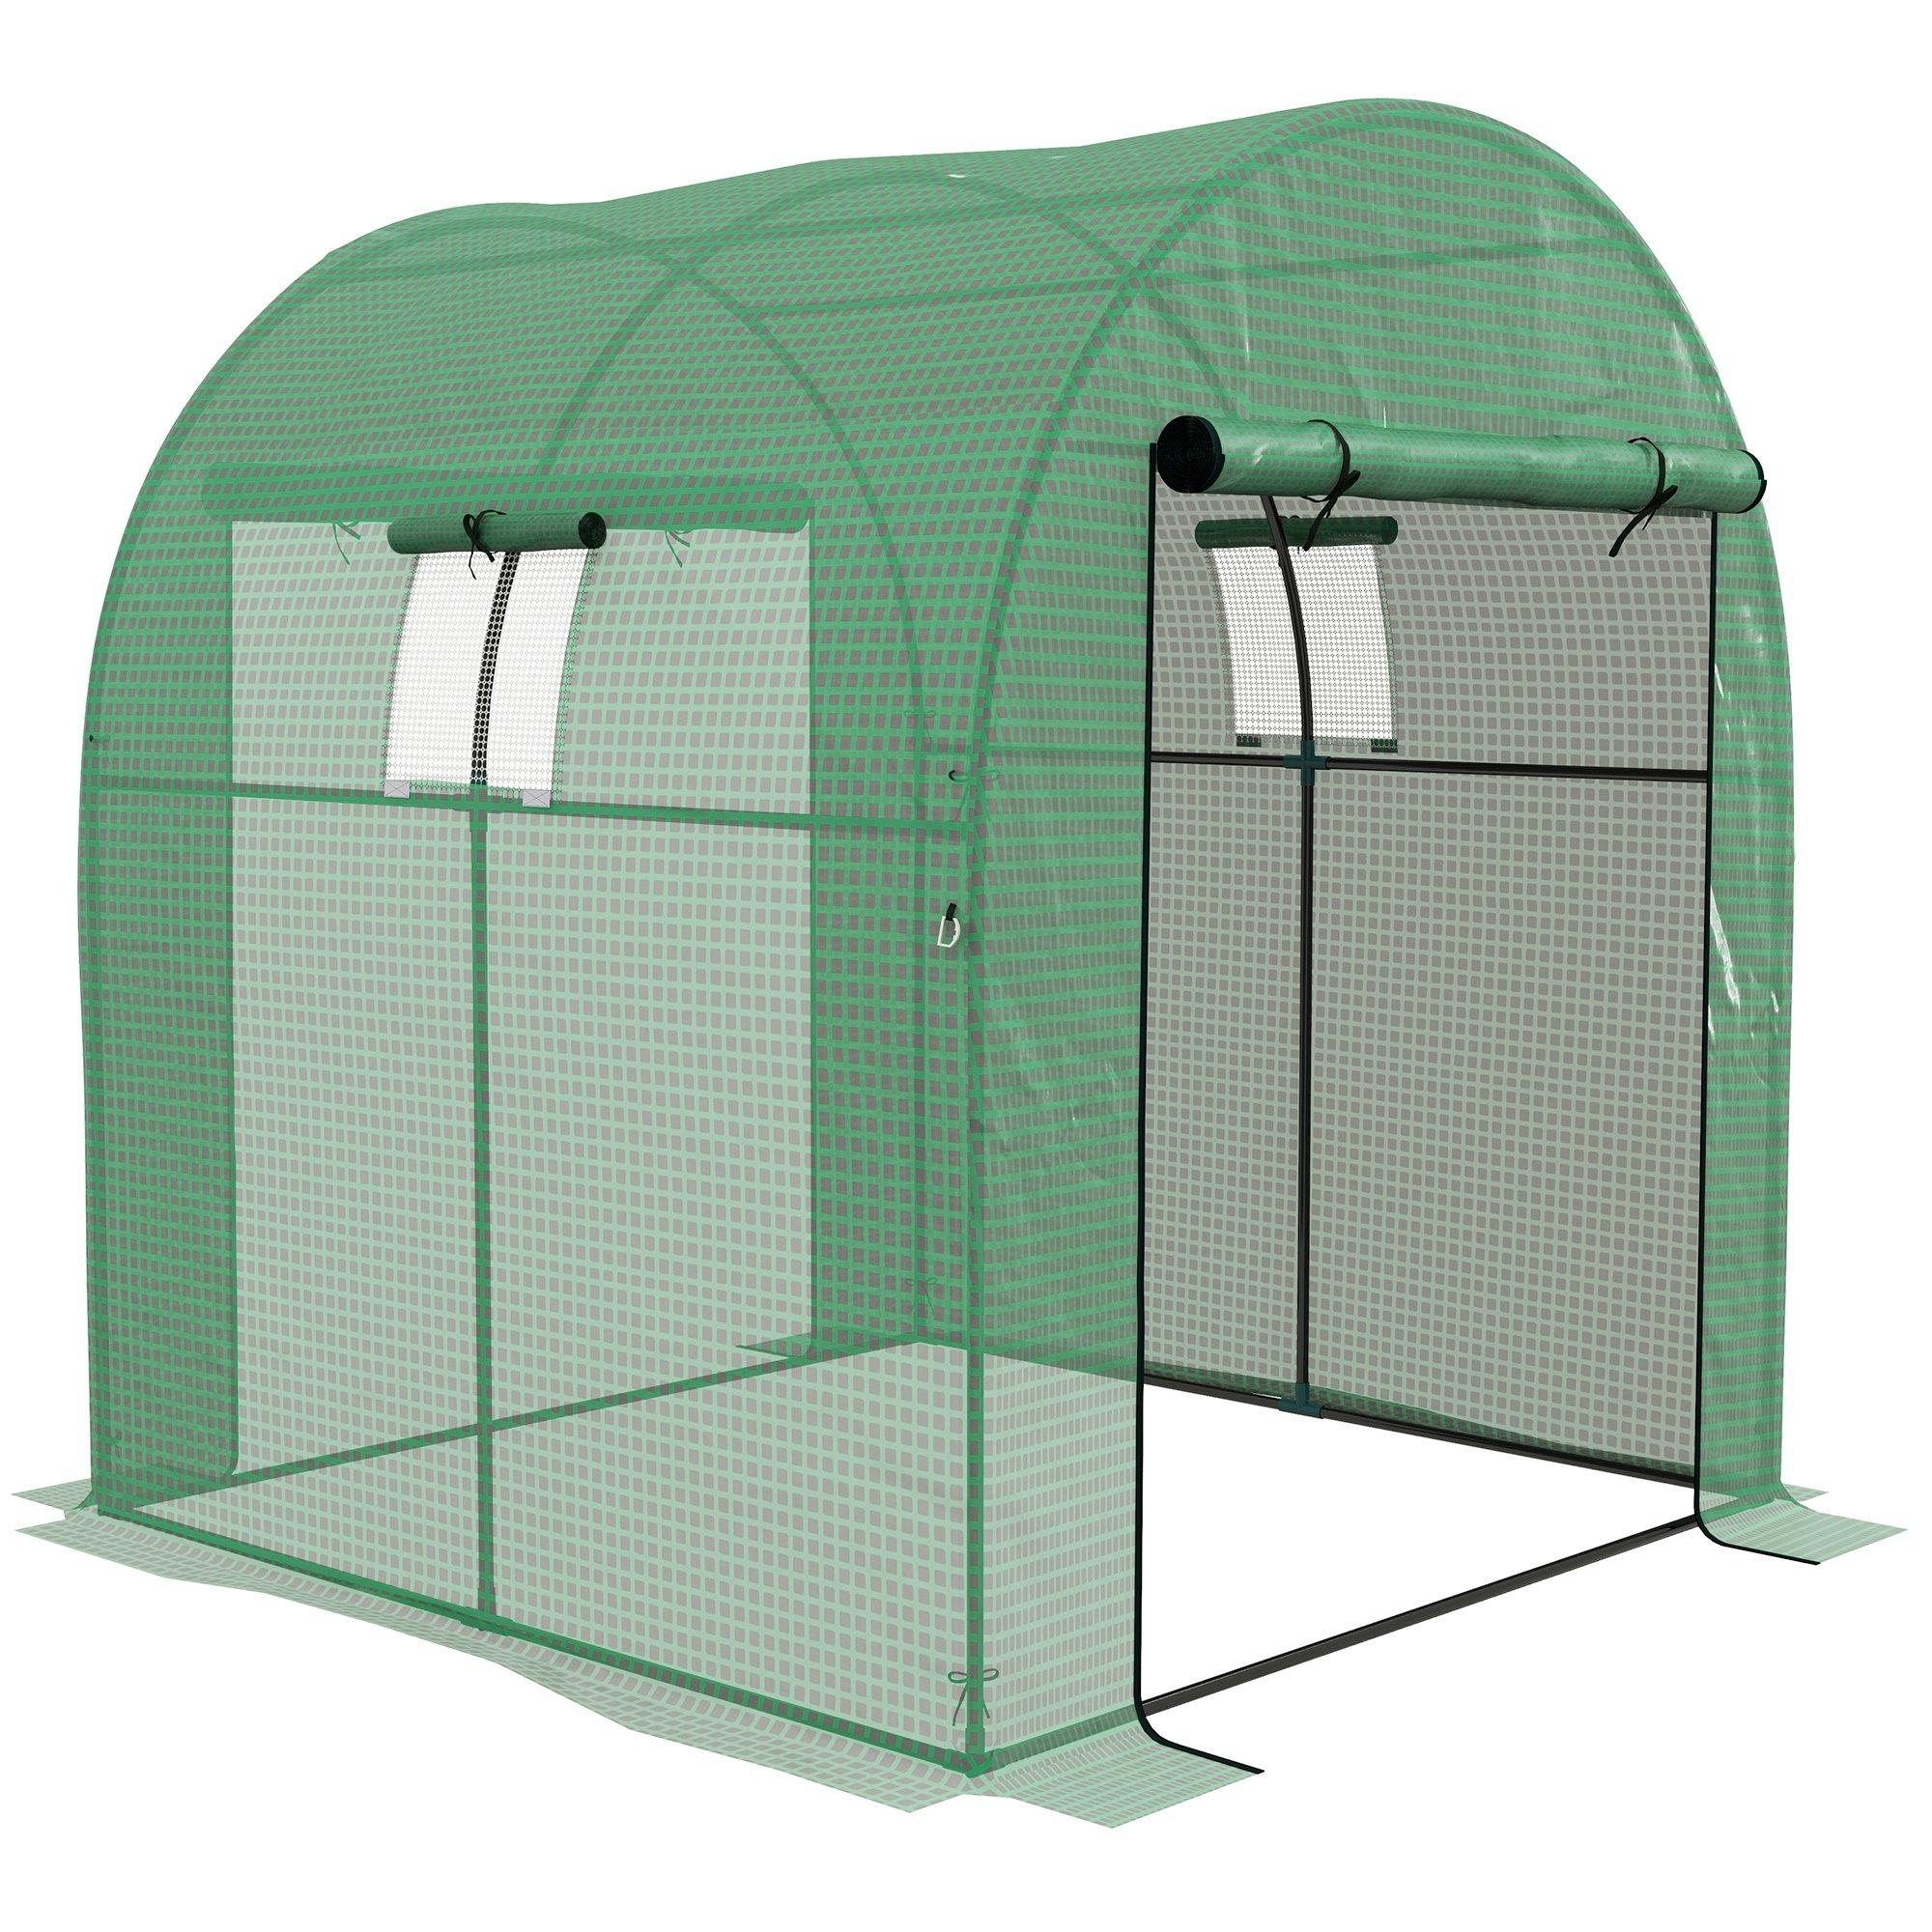 Polytunnel Greenhouse with UV-resistant PE Cover, Grow House, 1.8 x 1.8 x 2m